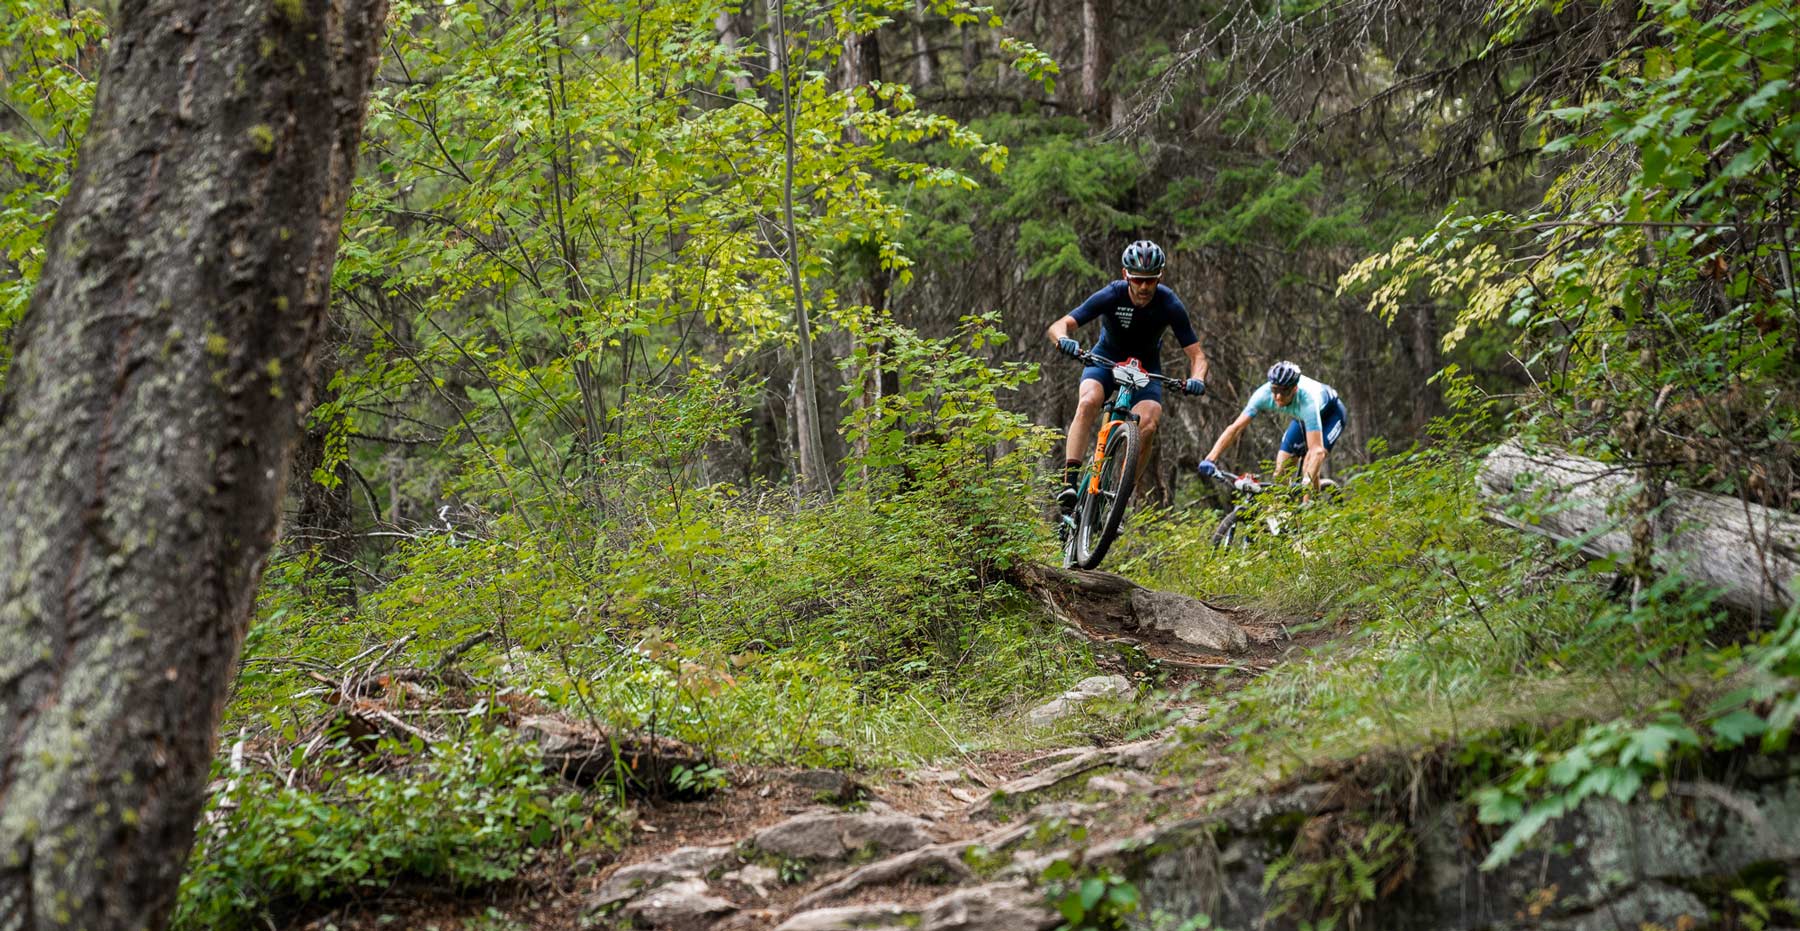 Peter Disera and Sandra Walter vault into early lead with Stage 1 victories at 2022 BCBR